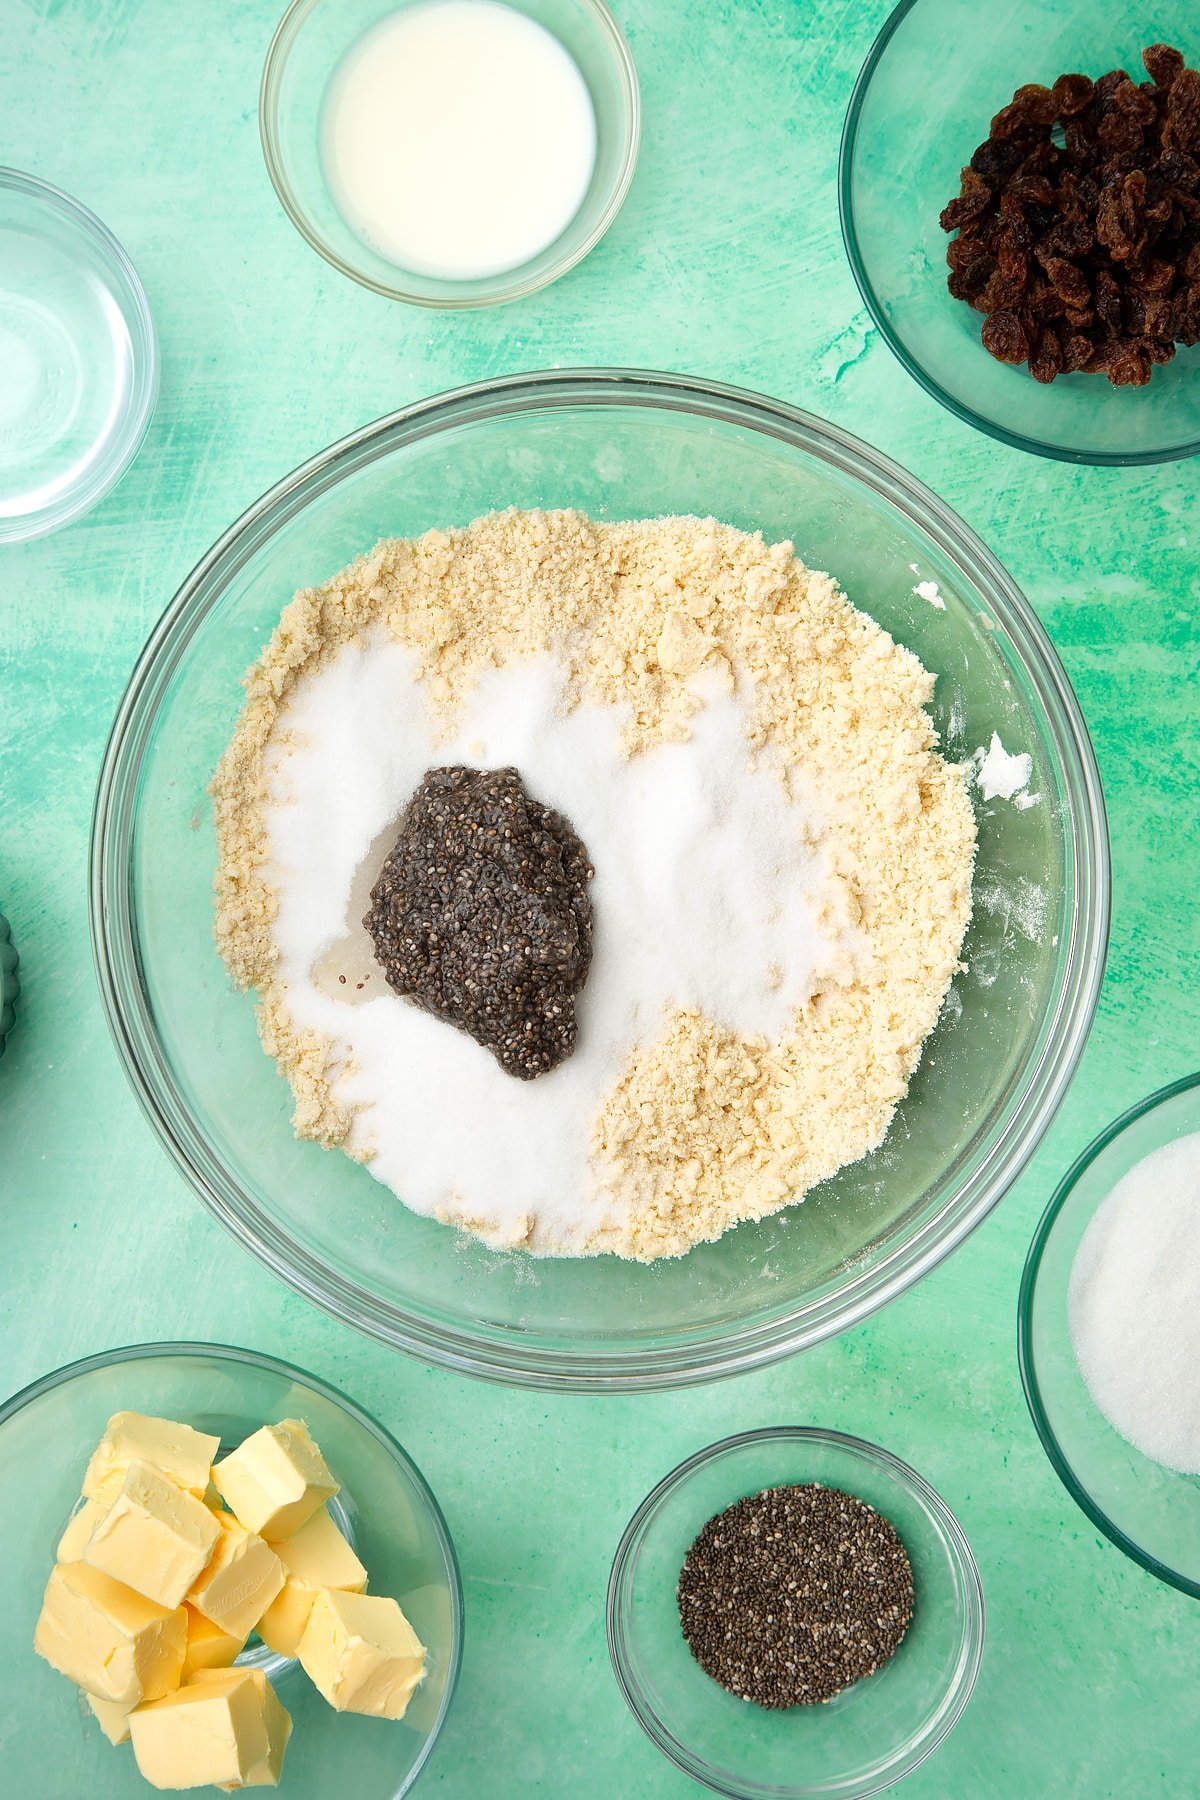 A glass mixing bowl containing self-raising flour and vegan margarine rubbed together, topped with sugar and chia seeds on top. Ingredients to make vegan Welsh cakes surround the bowl.